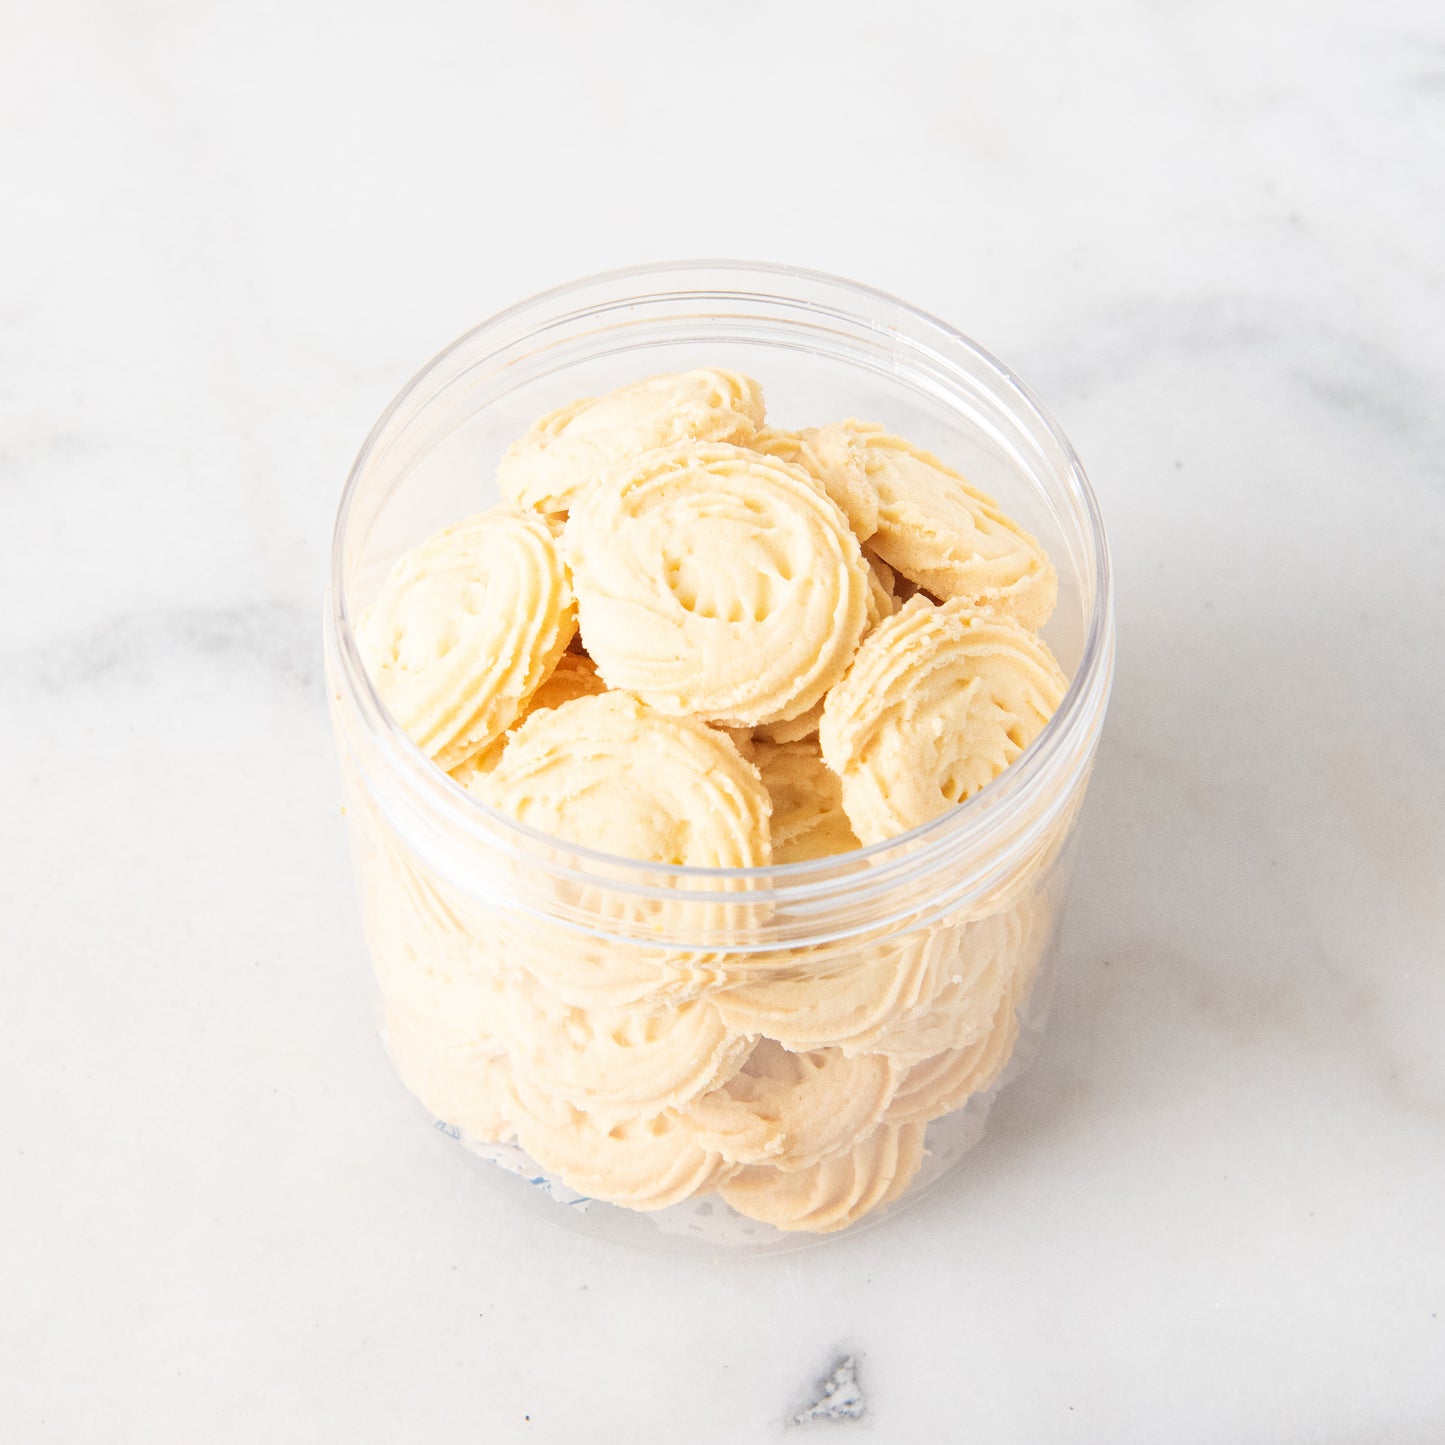 Year Of The Dragon! | Small Butter Cookies | $13.80 Nett